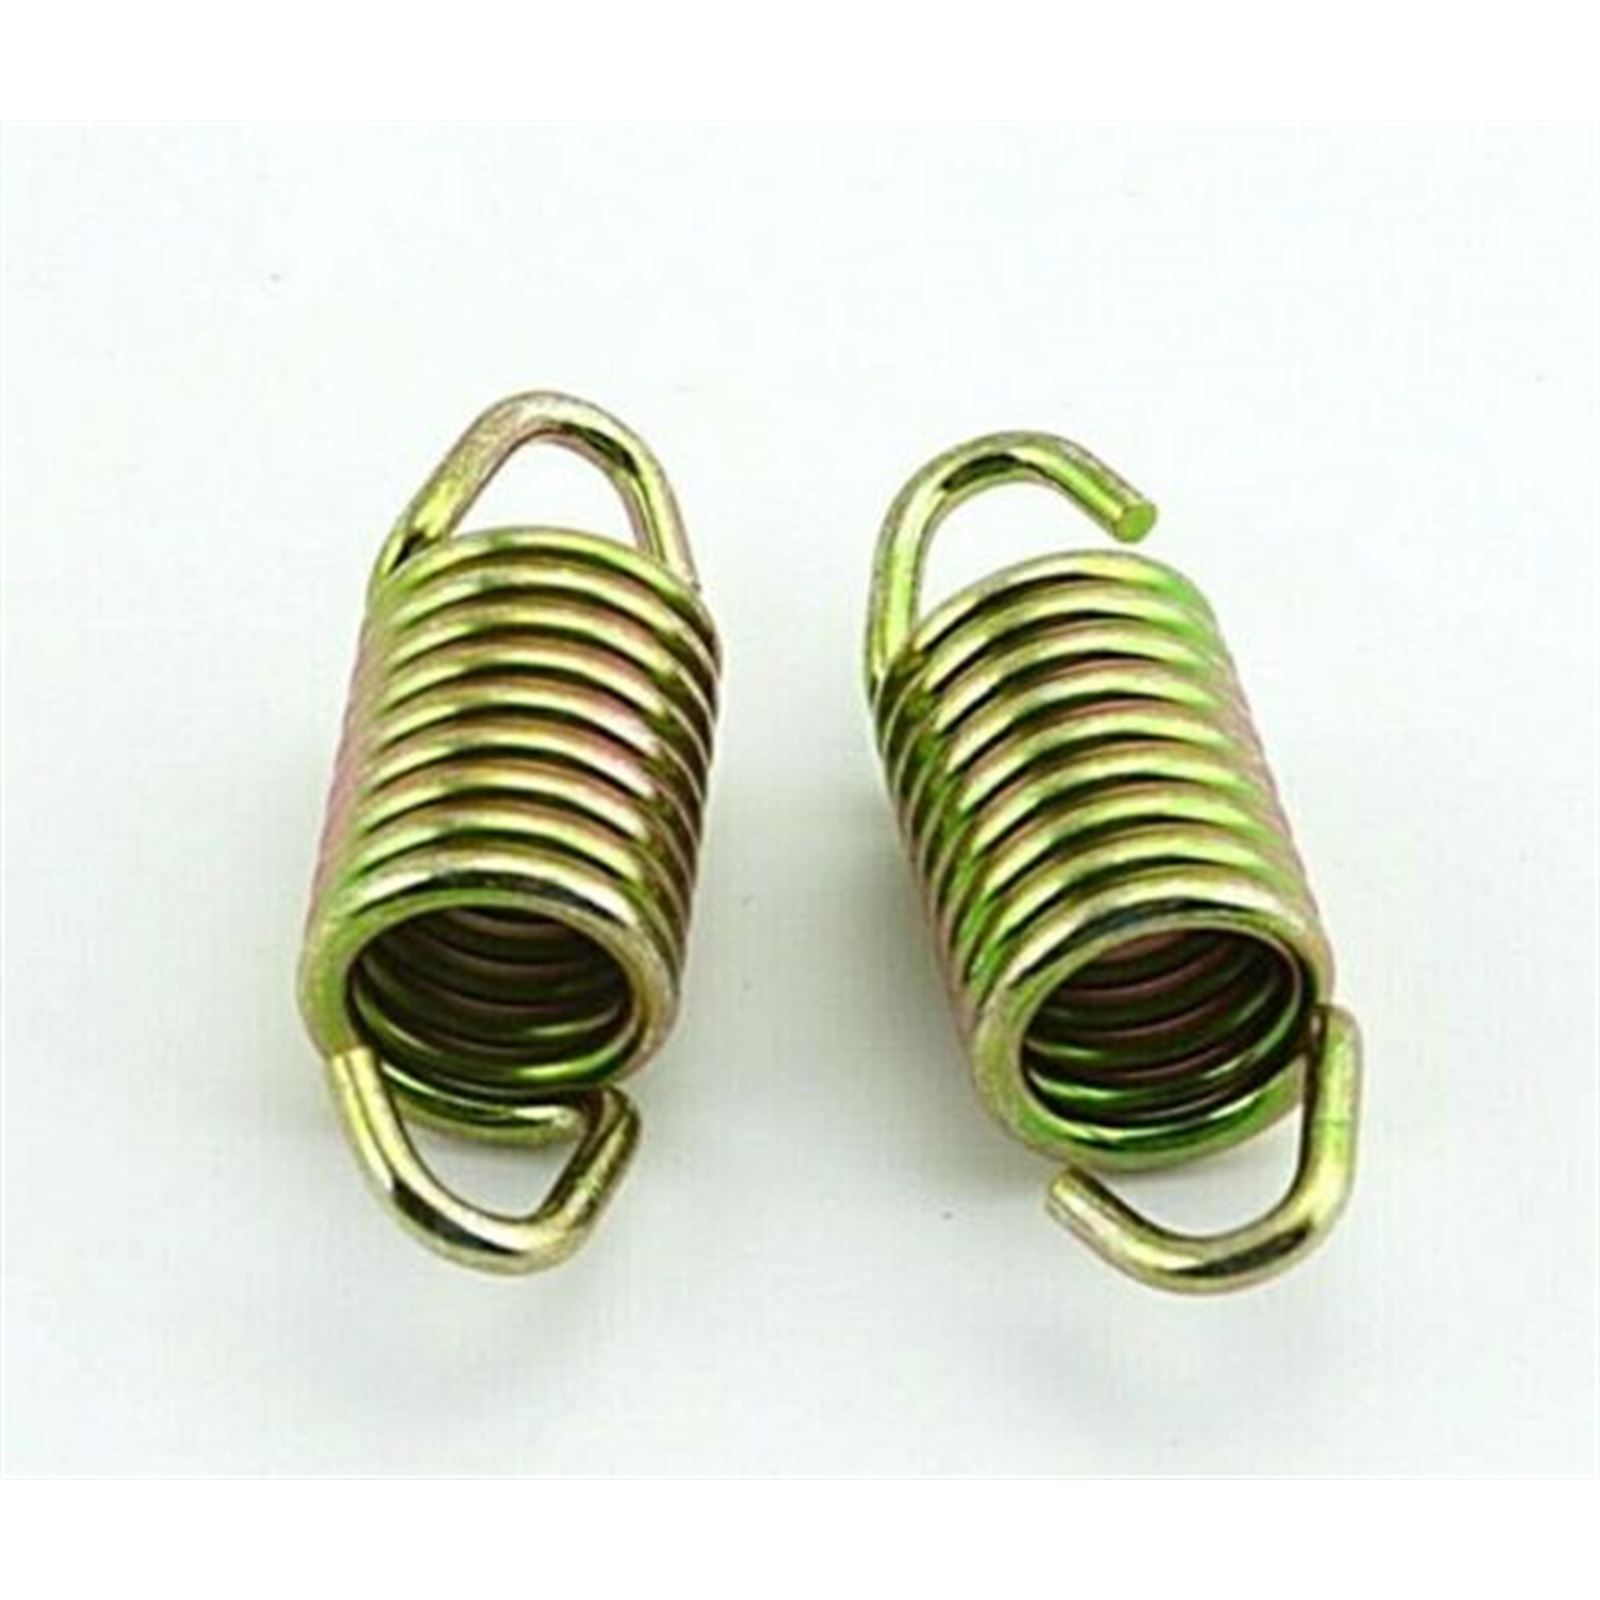 2FastMoto 2" EXHAUST SPRING 2 PACK FOR POLARIS